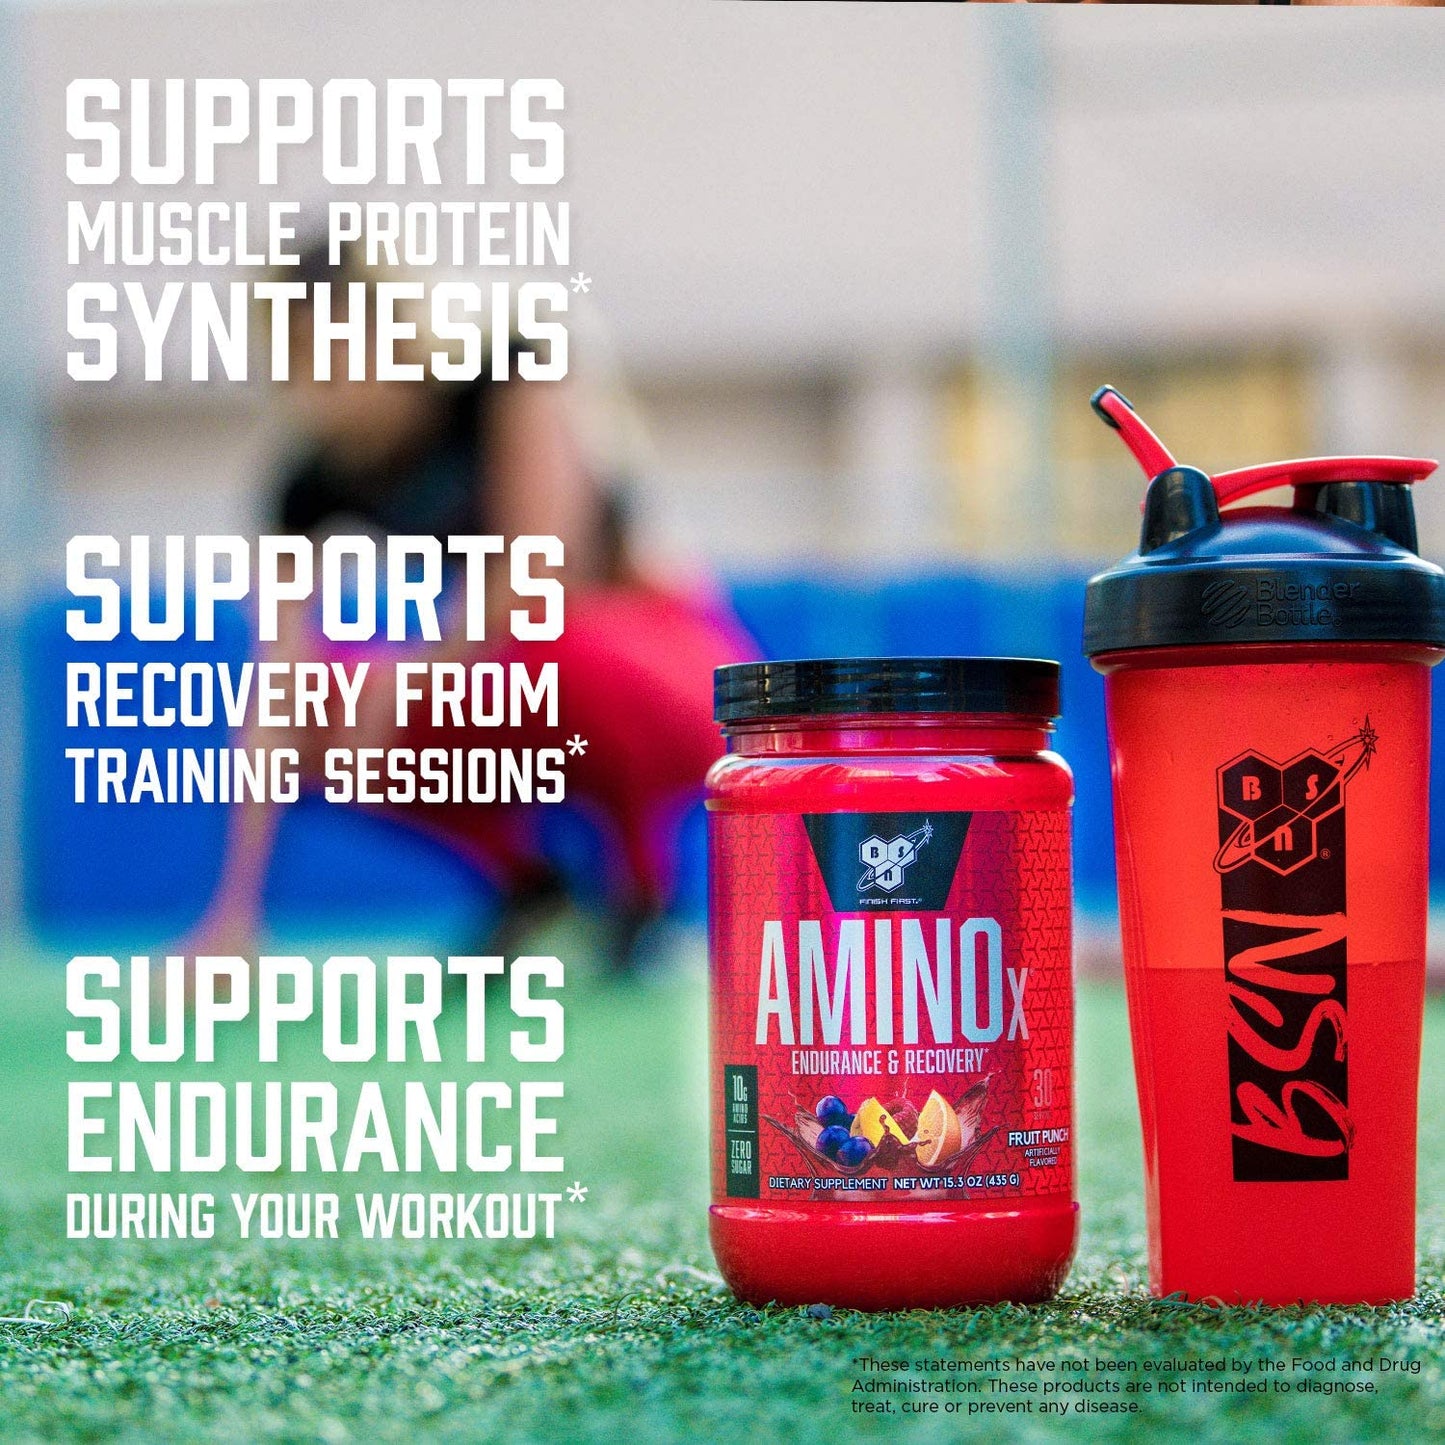 BSN Amino X Muscle Recovery & Endurance Powder with BCAAs